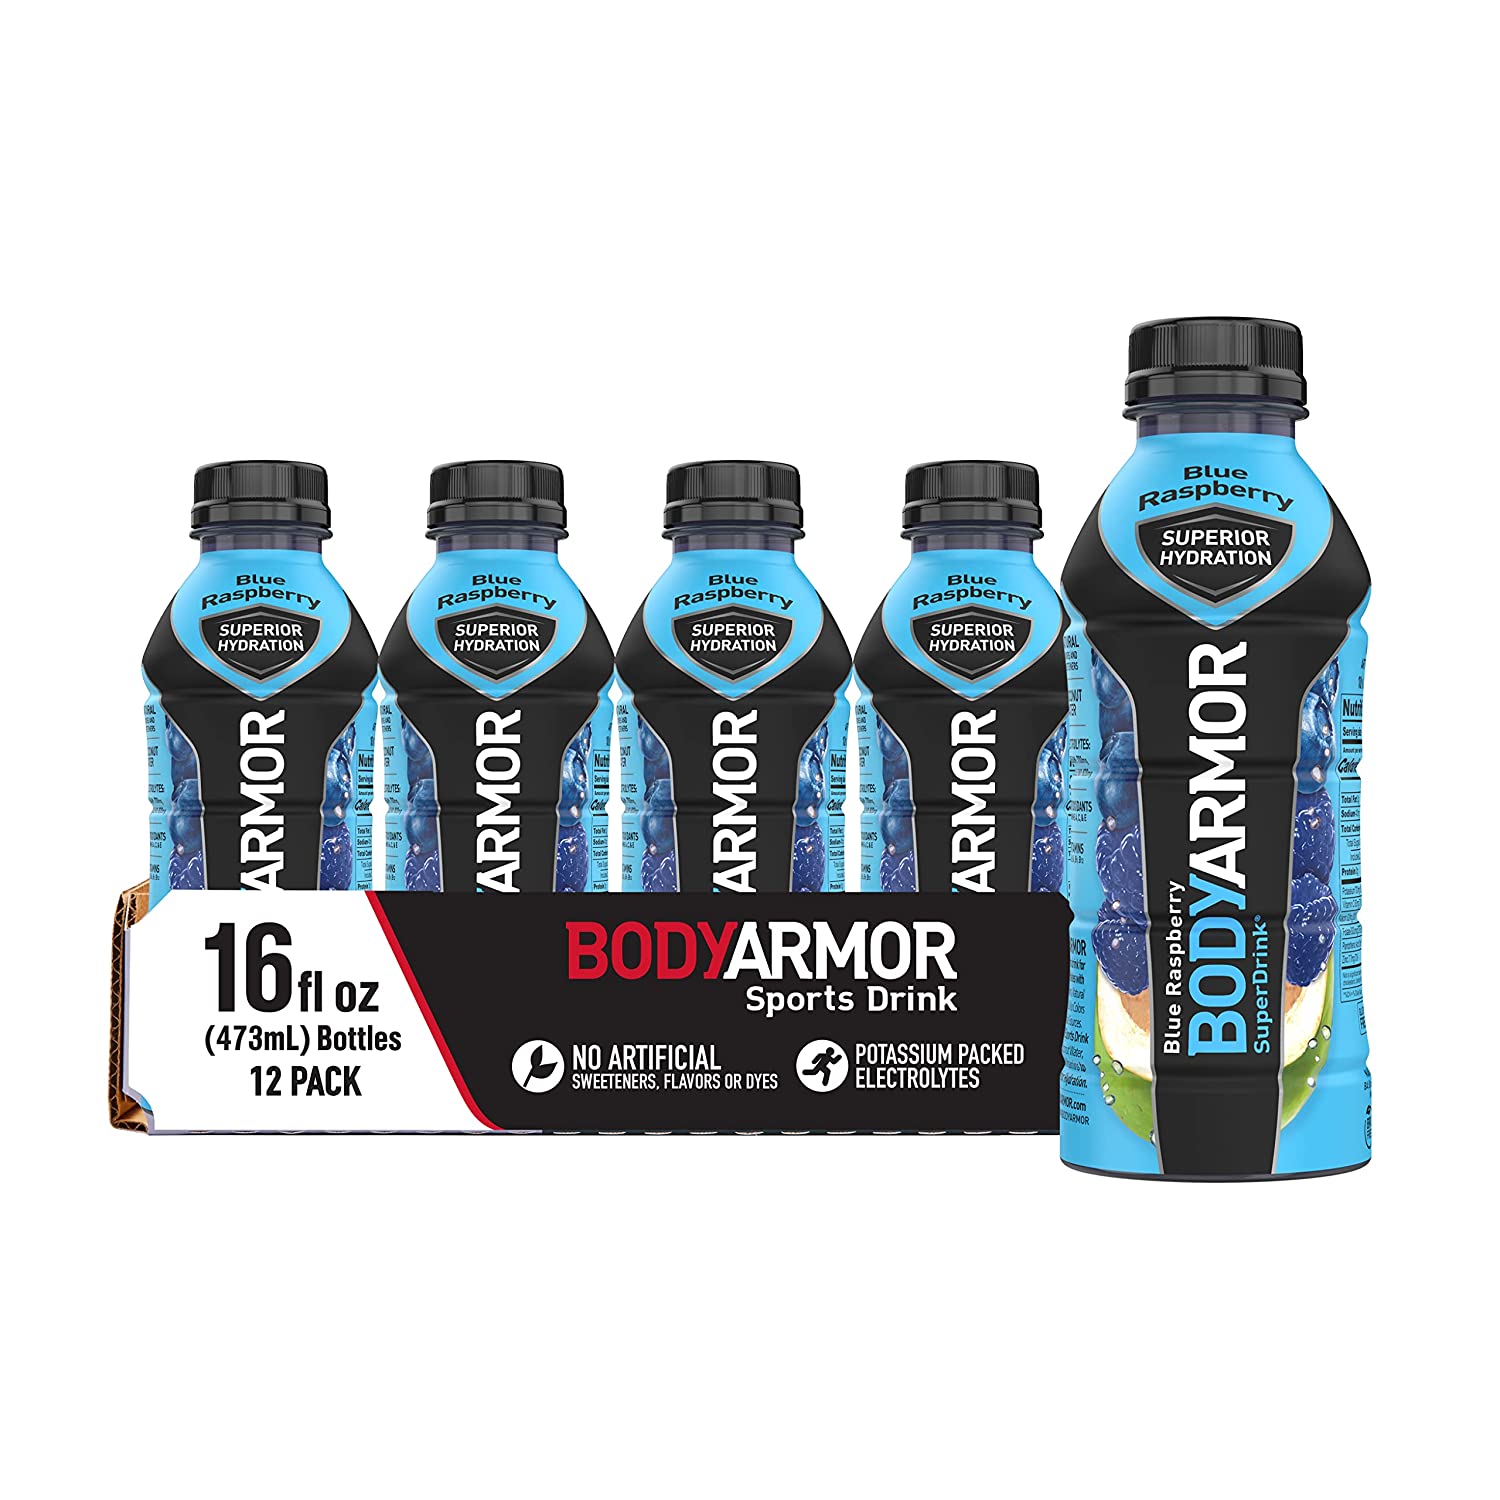 12-Pack 16-Oz BodyArmor Sports Drink (Blue Raspberry) $11.38 w/ S&S + Free Shipping w/ Prime or on orders over $25